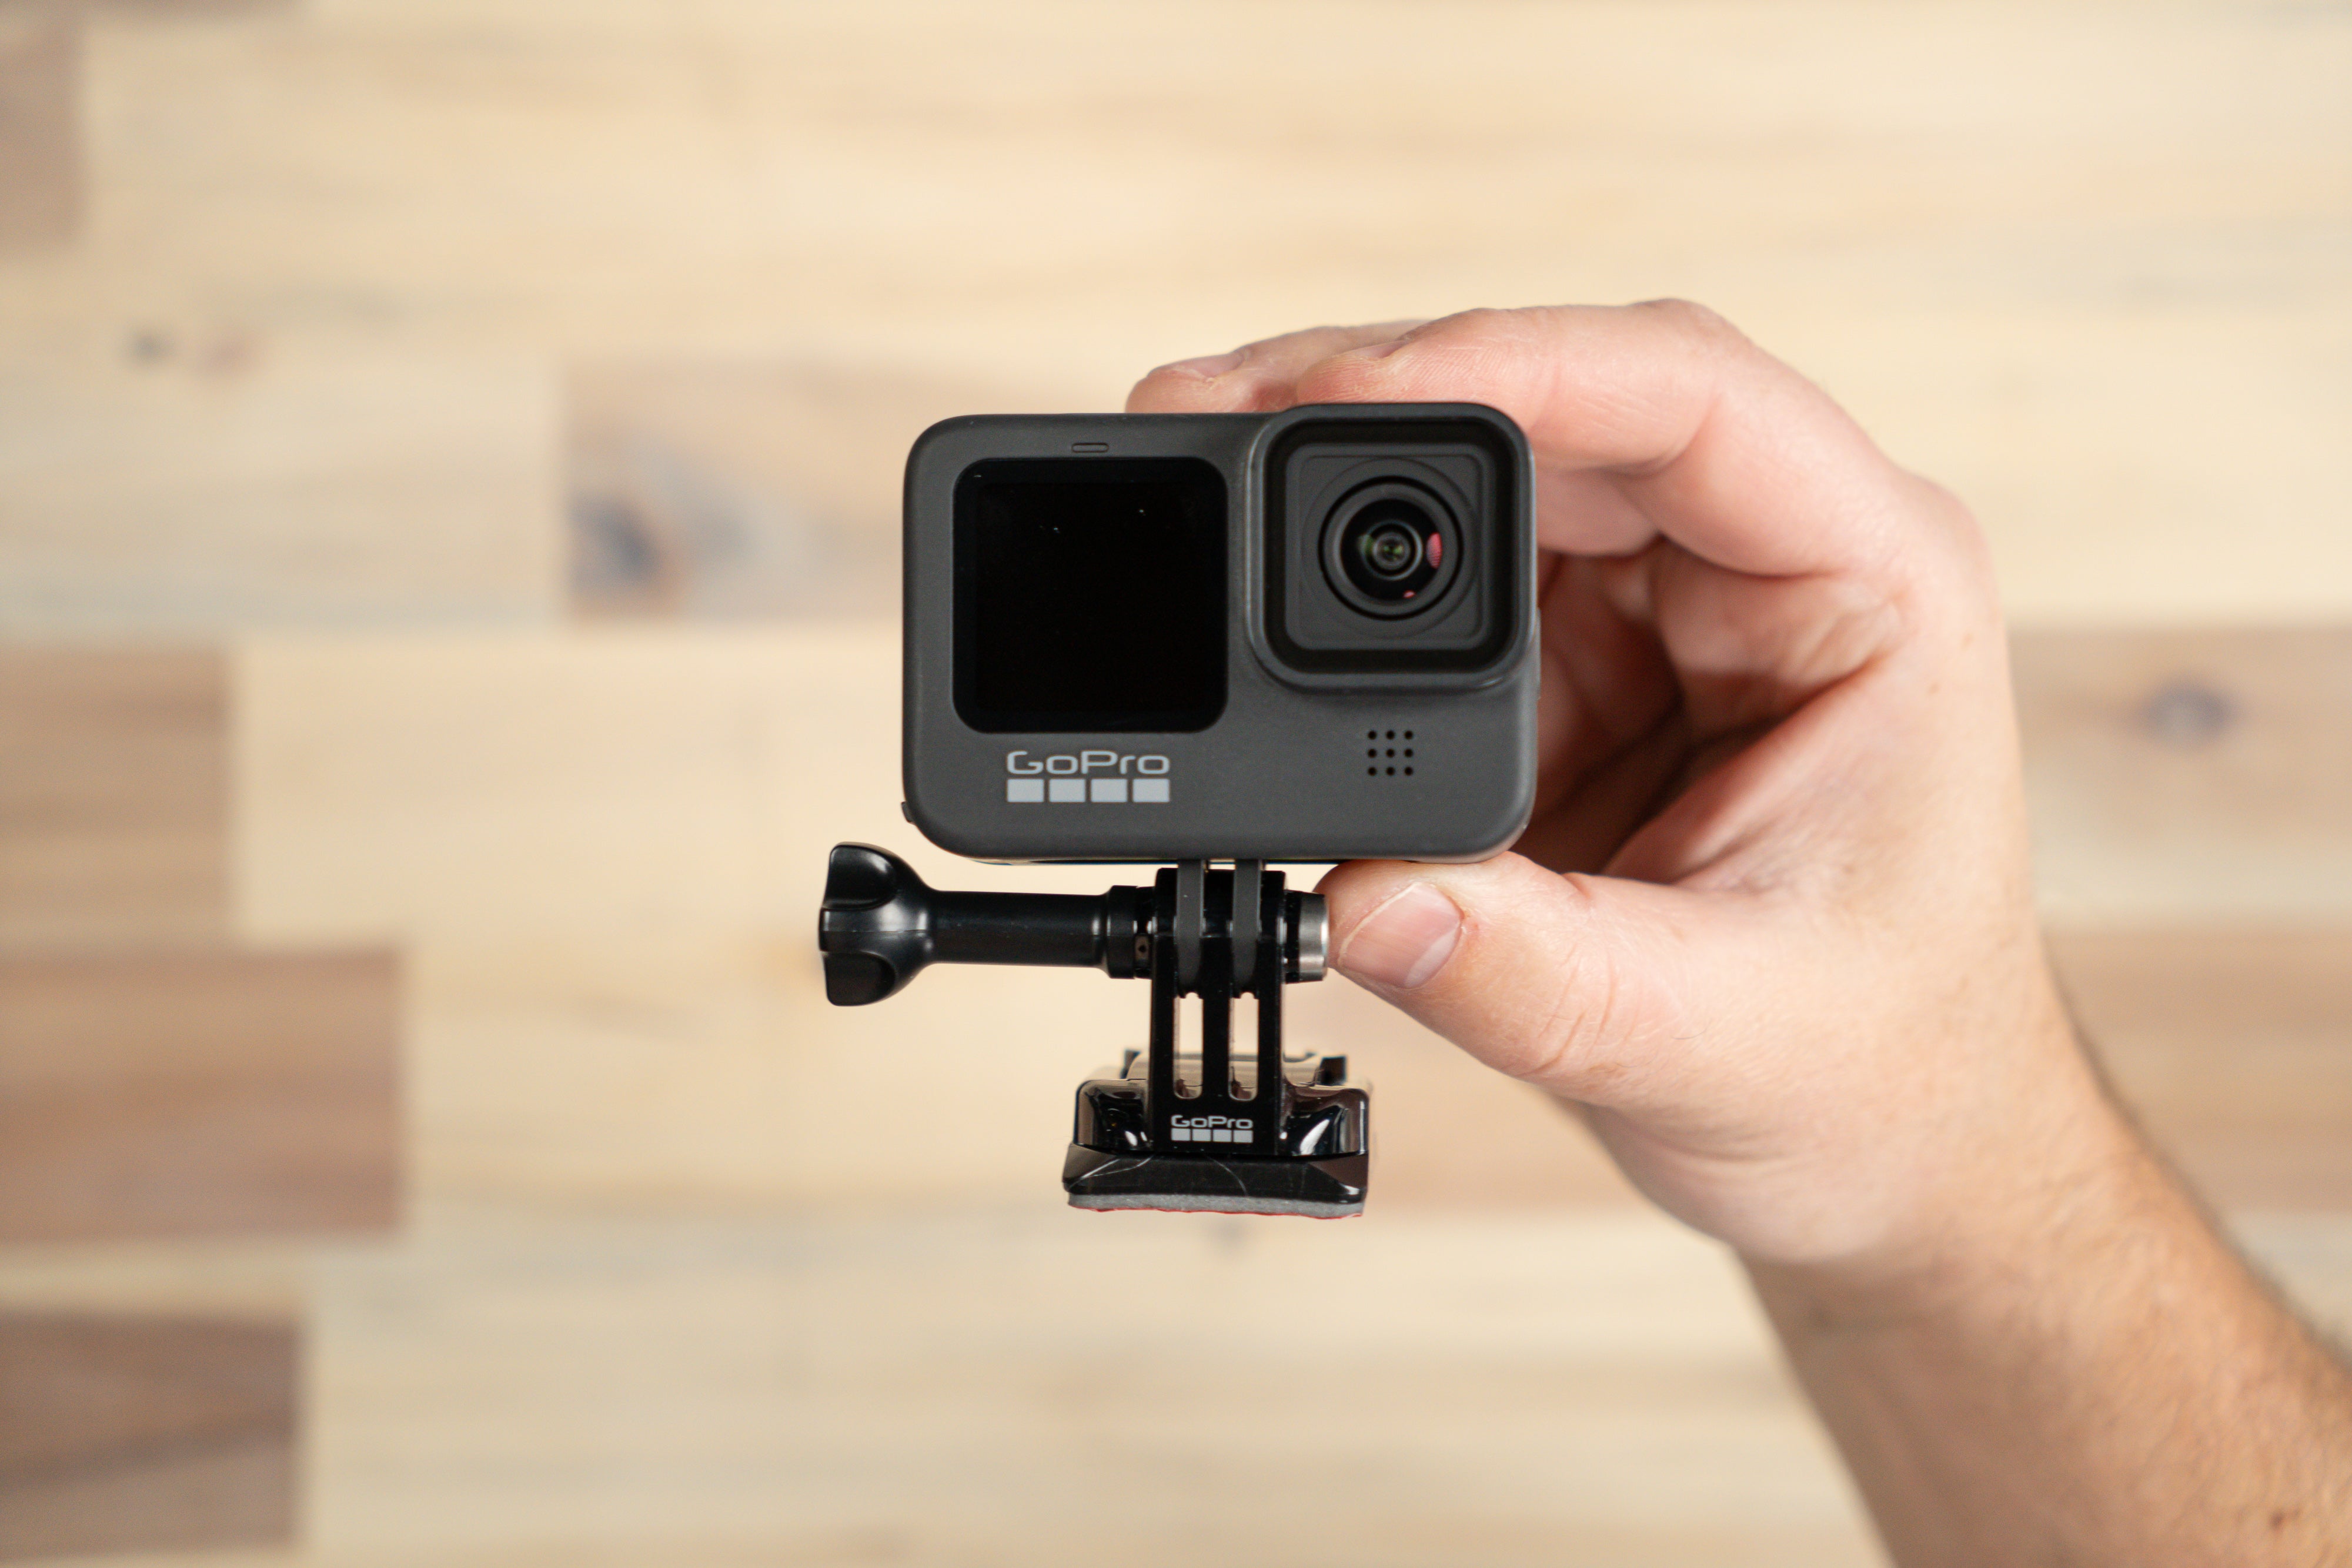 GoPro Hero 9 Black - Waterproof Action Camera with Front LCD and Touch Rear Screens, 5K Ultra HD Video, 20MP Photos, 1080p Live Streaming, Webcam, Stabilization